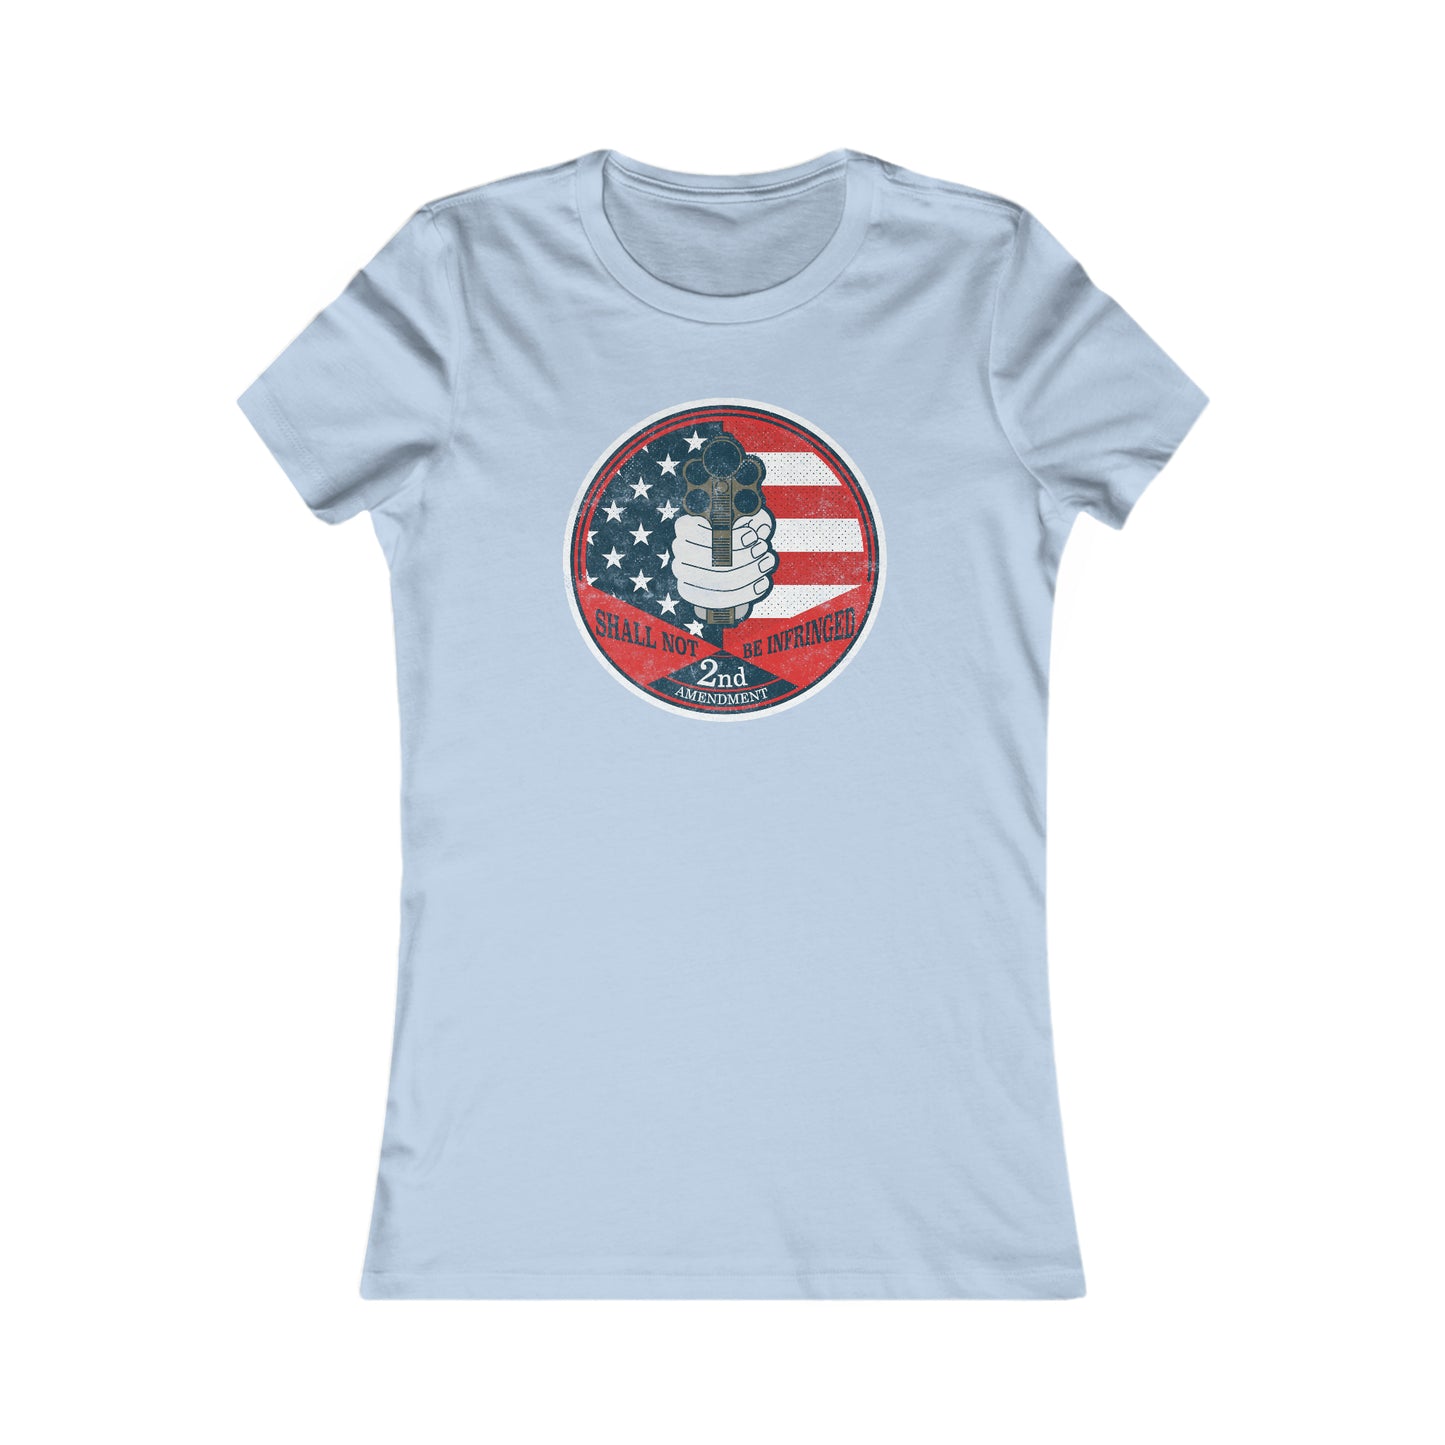 Shall Not Be Infringed 2A Women's Favorite Tee